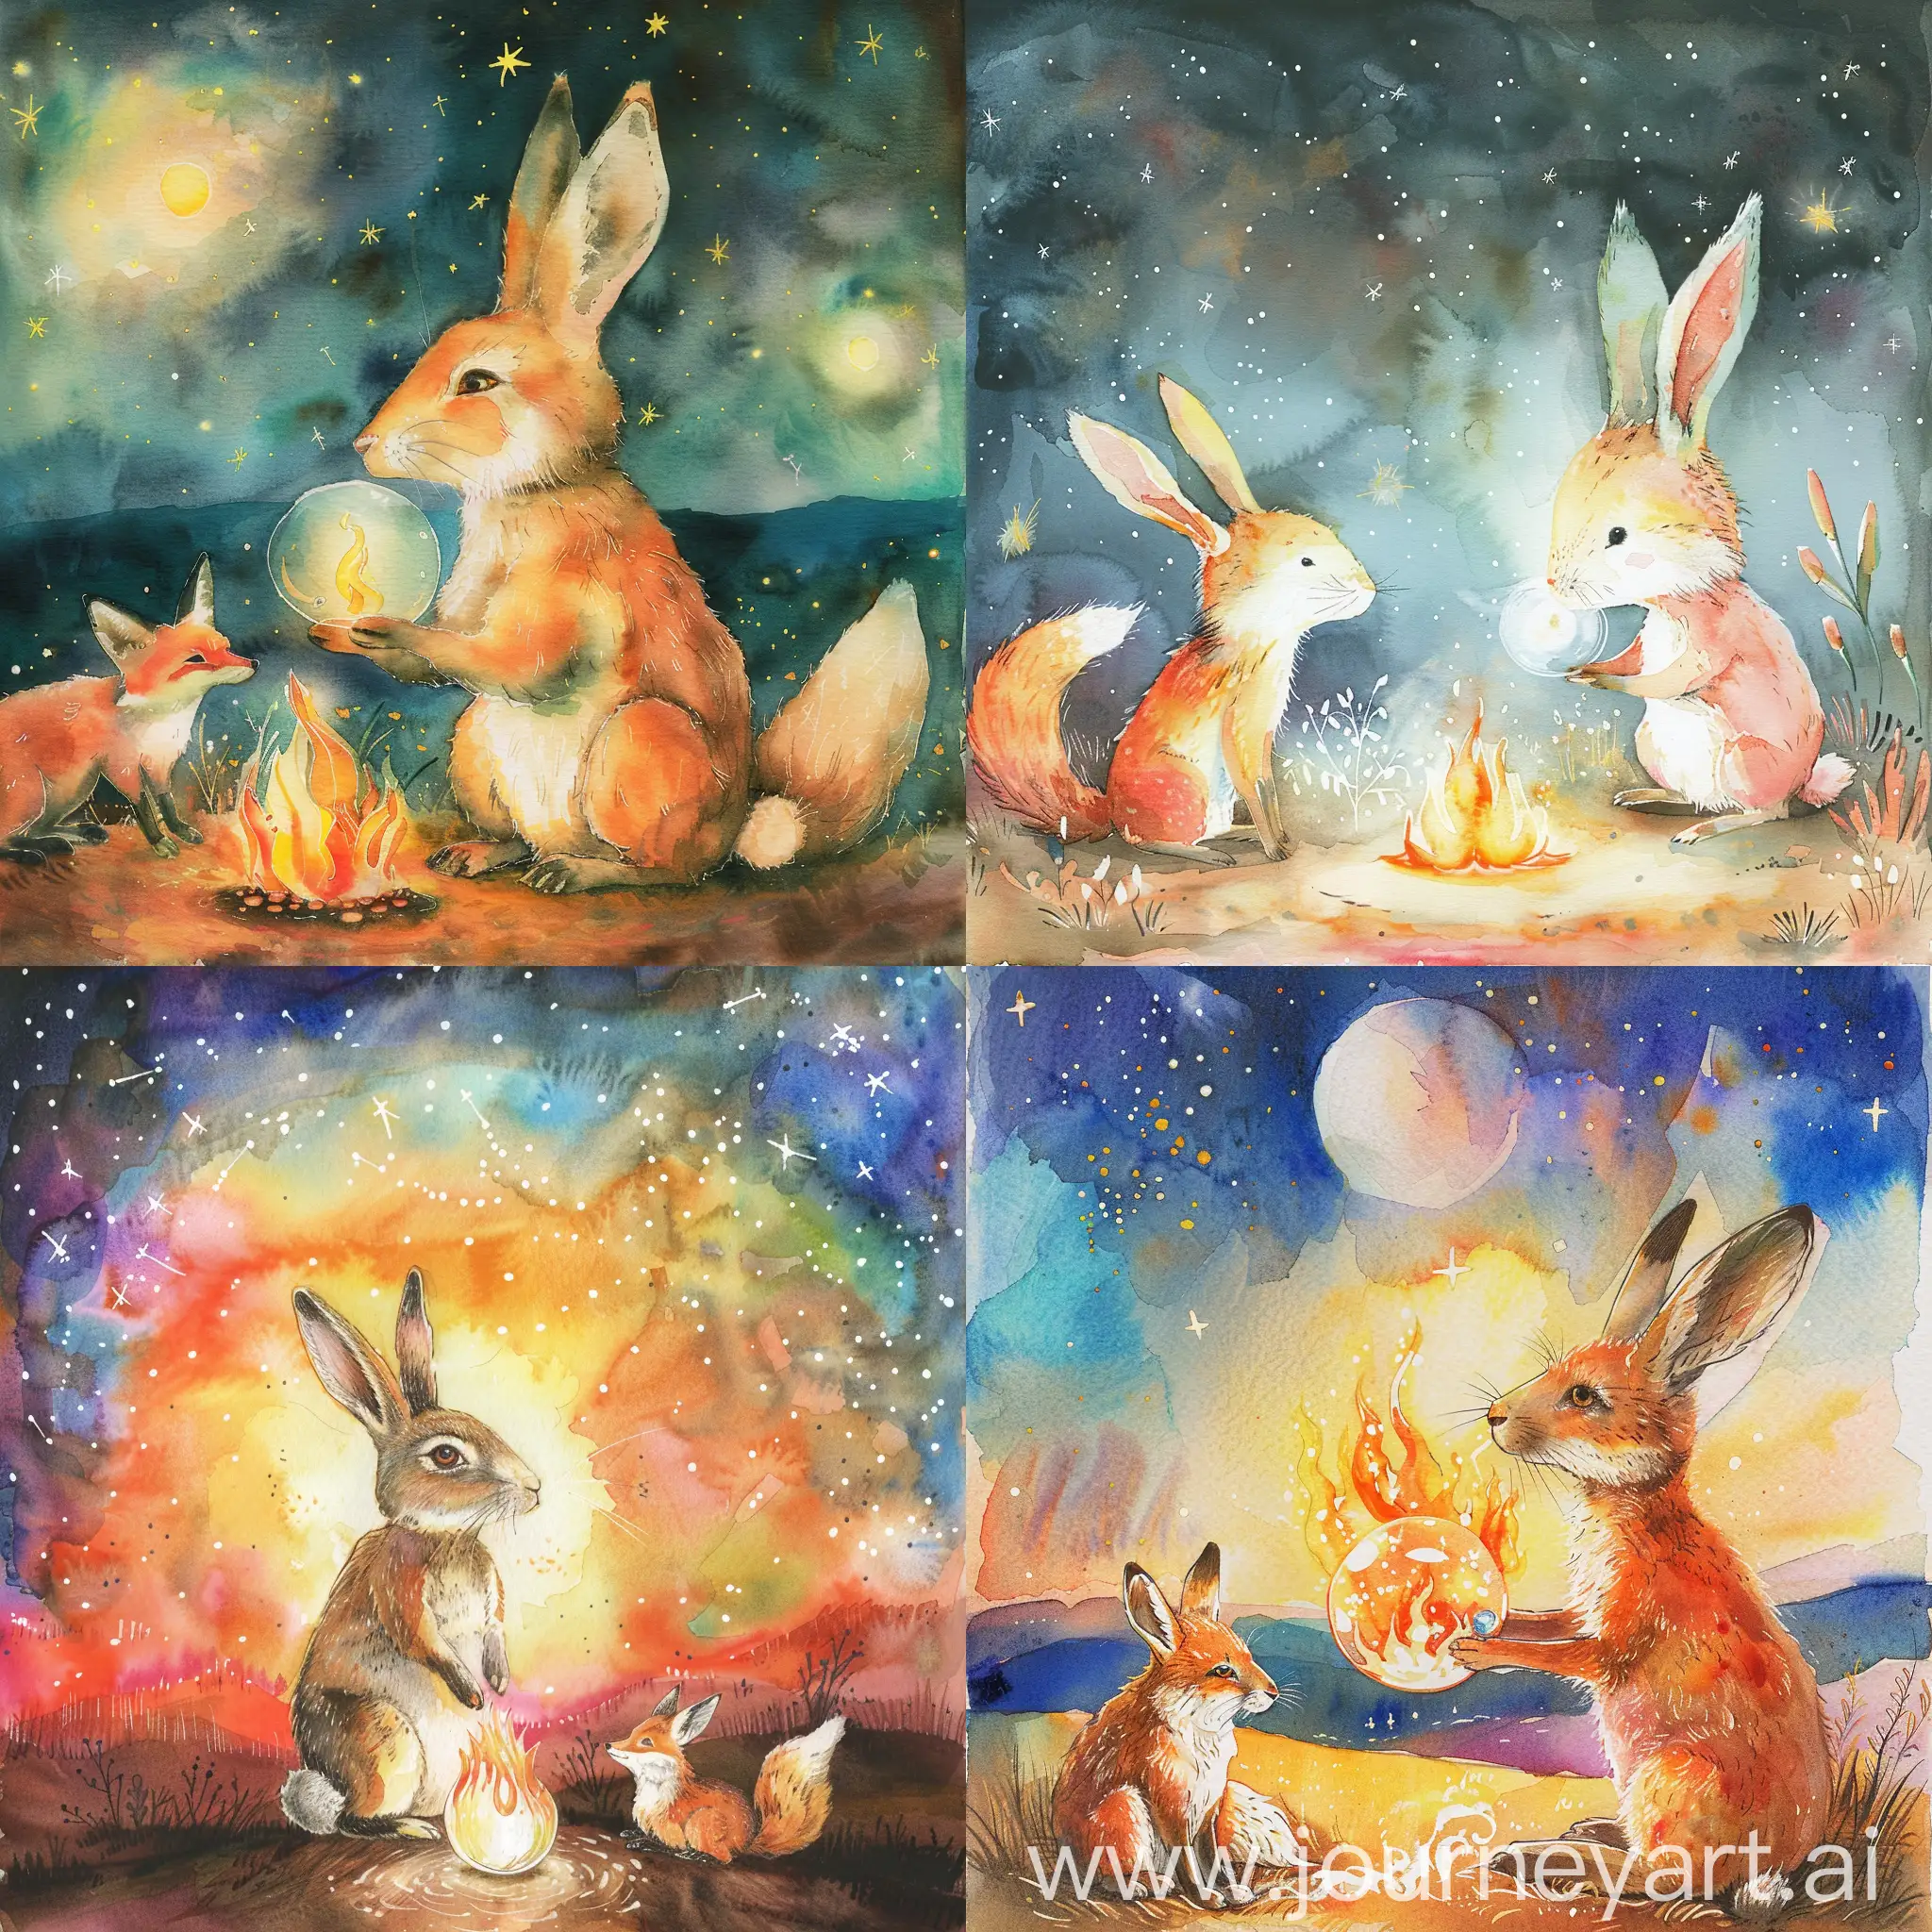 Living room, night, young Rabbit lLook into front at flame (focus) glass orb, side fox, watercolor illustration of surrounded by bright stars, colorful landscape